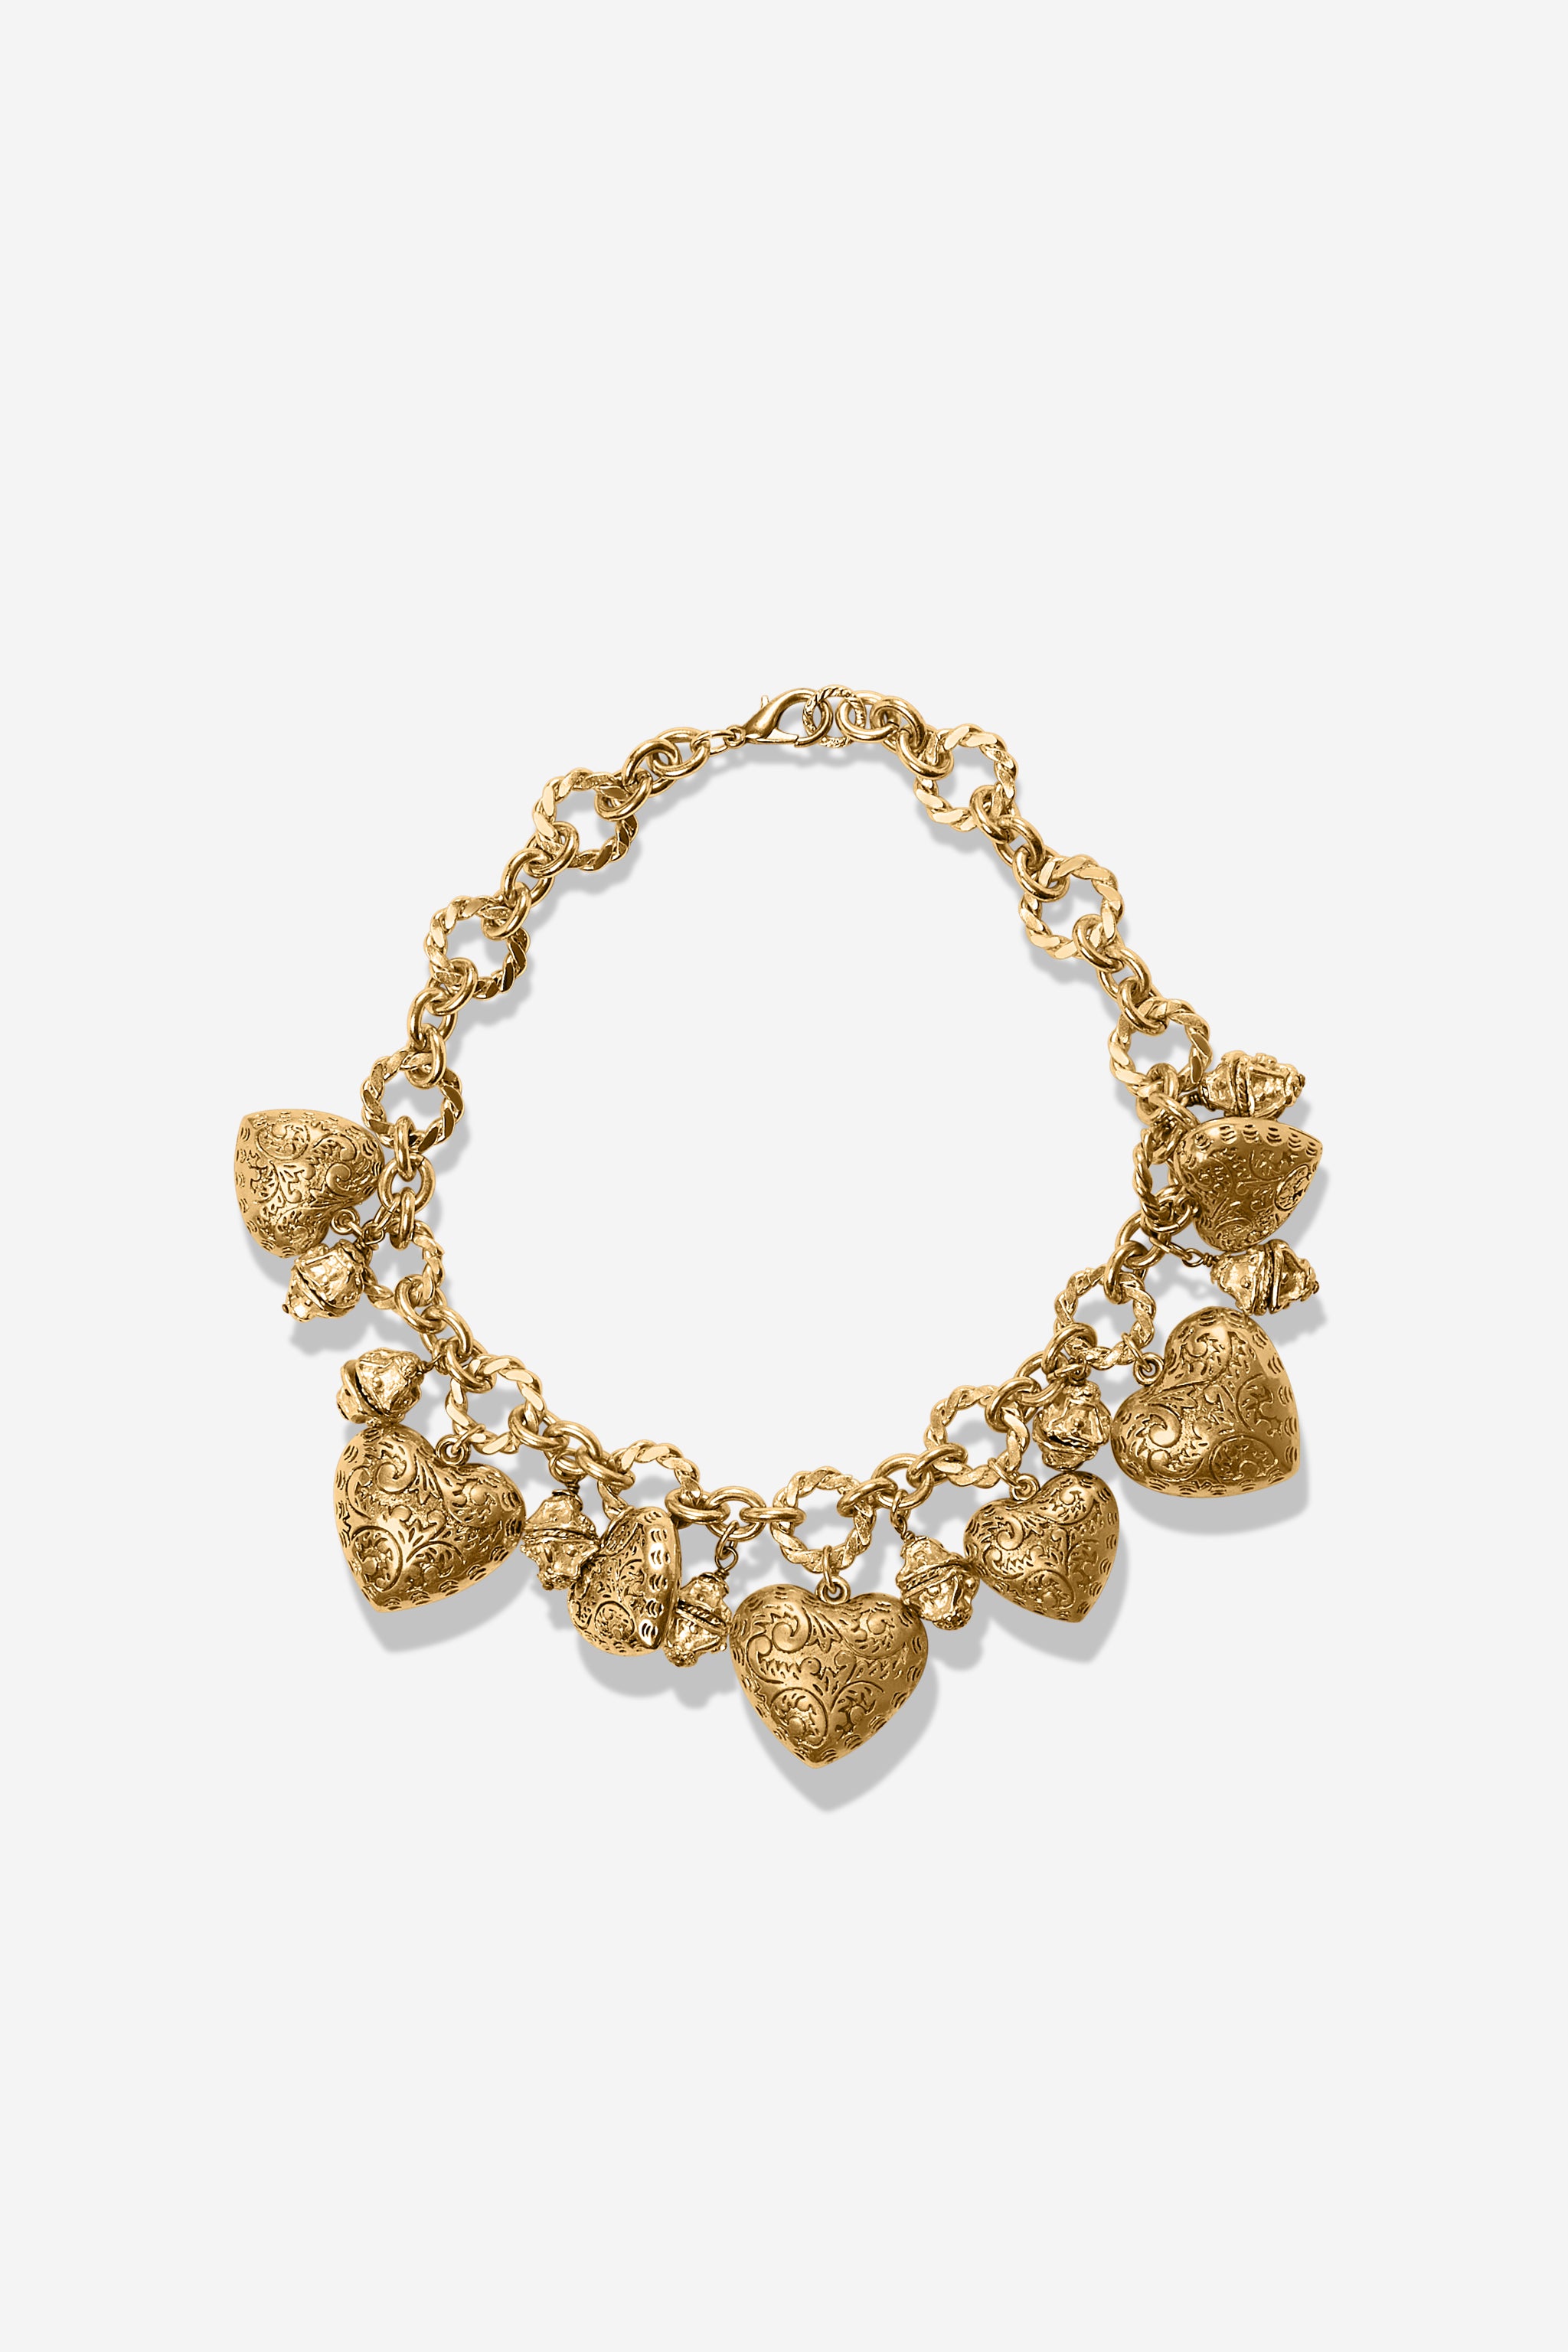 Golden hearts necklace